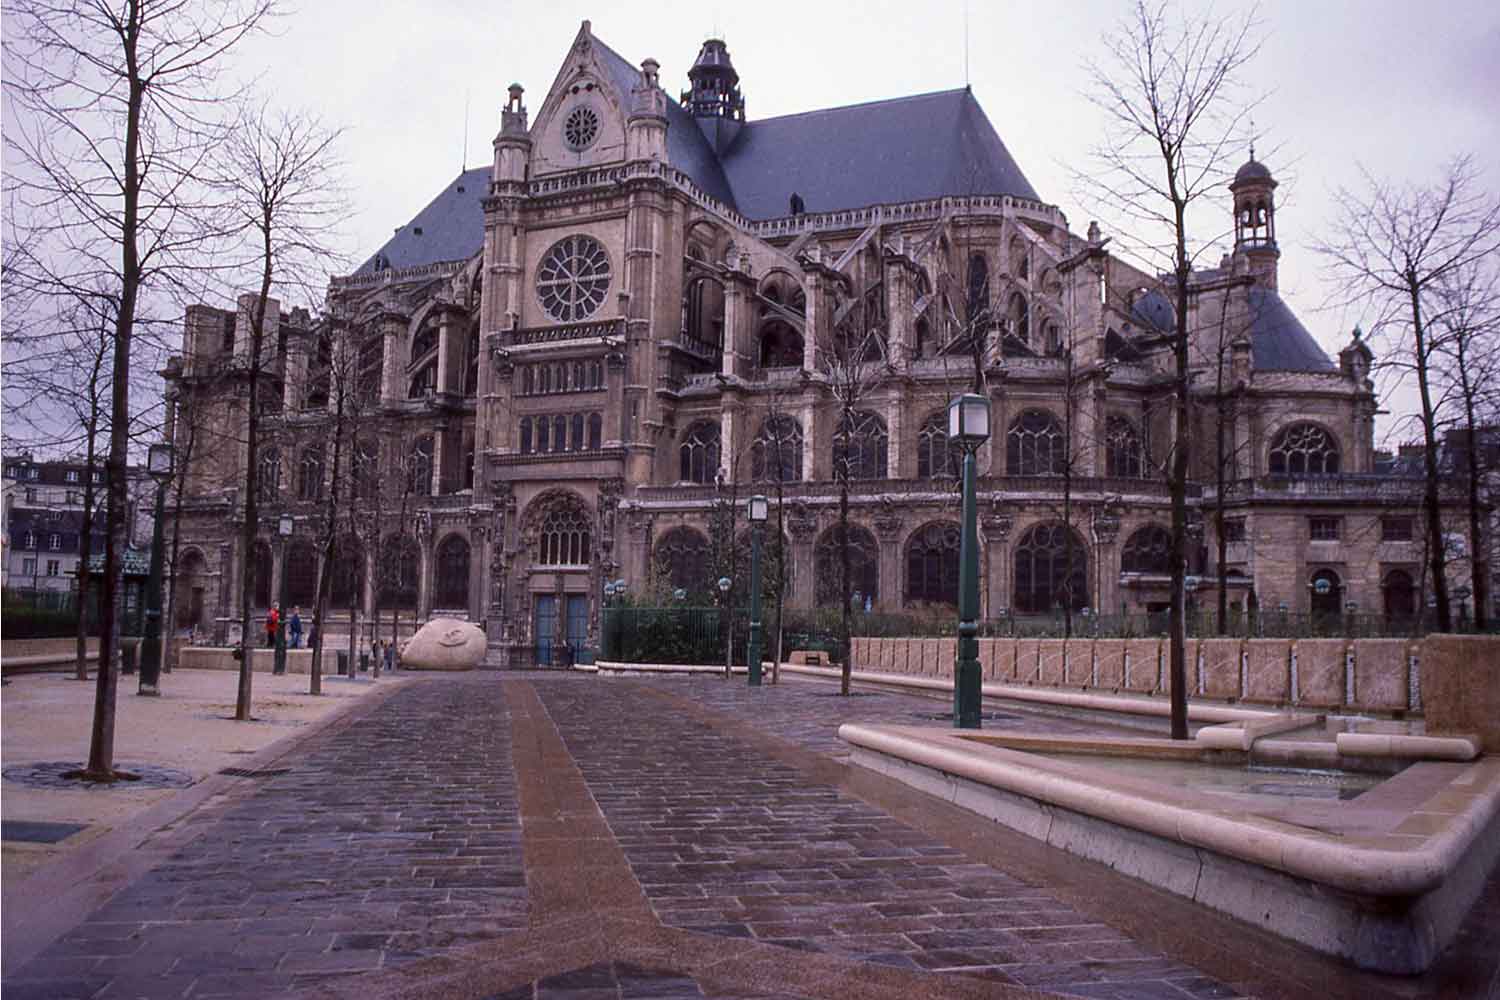 Large church with flying buttresses, Paris, France